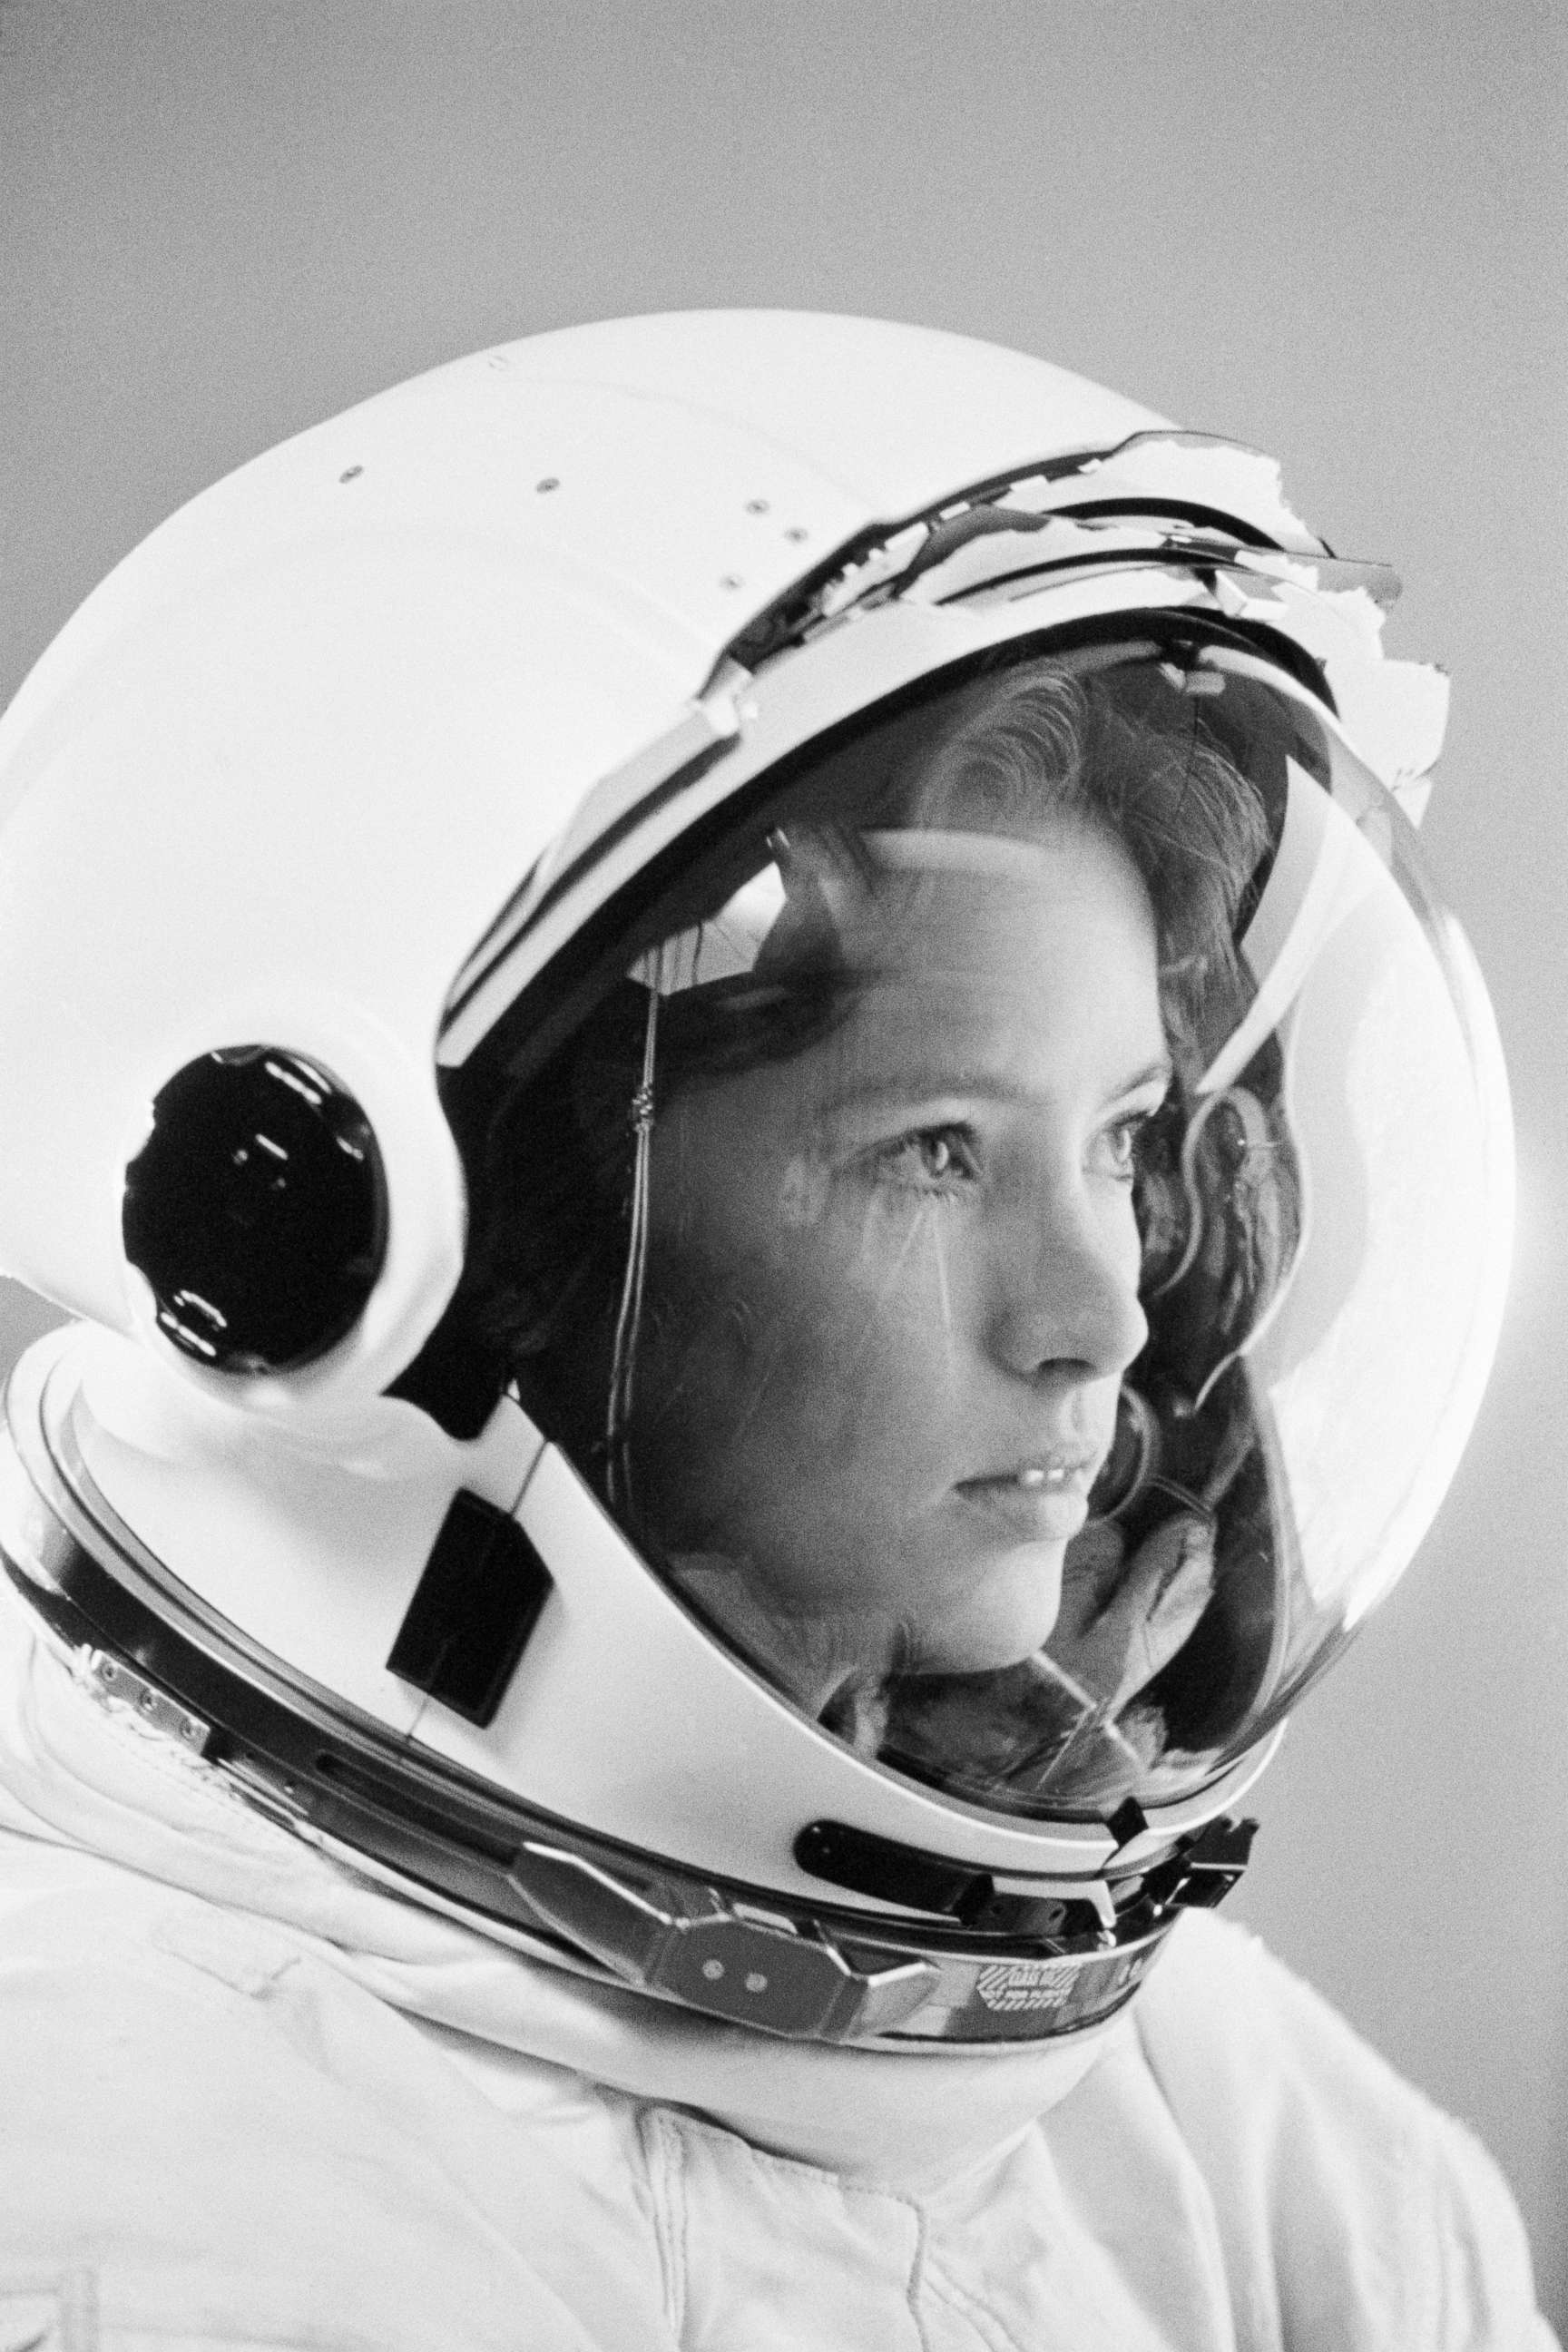 PHOTO: NASA Astronaut Anna Lee Fisher is pictured while training at the Lyndon B. Johnson Space Center, in Houston for a space shuttle launch in 1984.